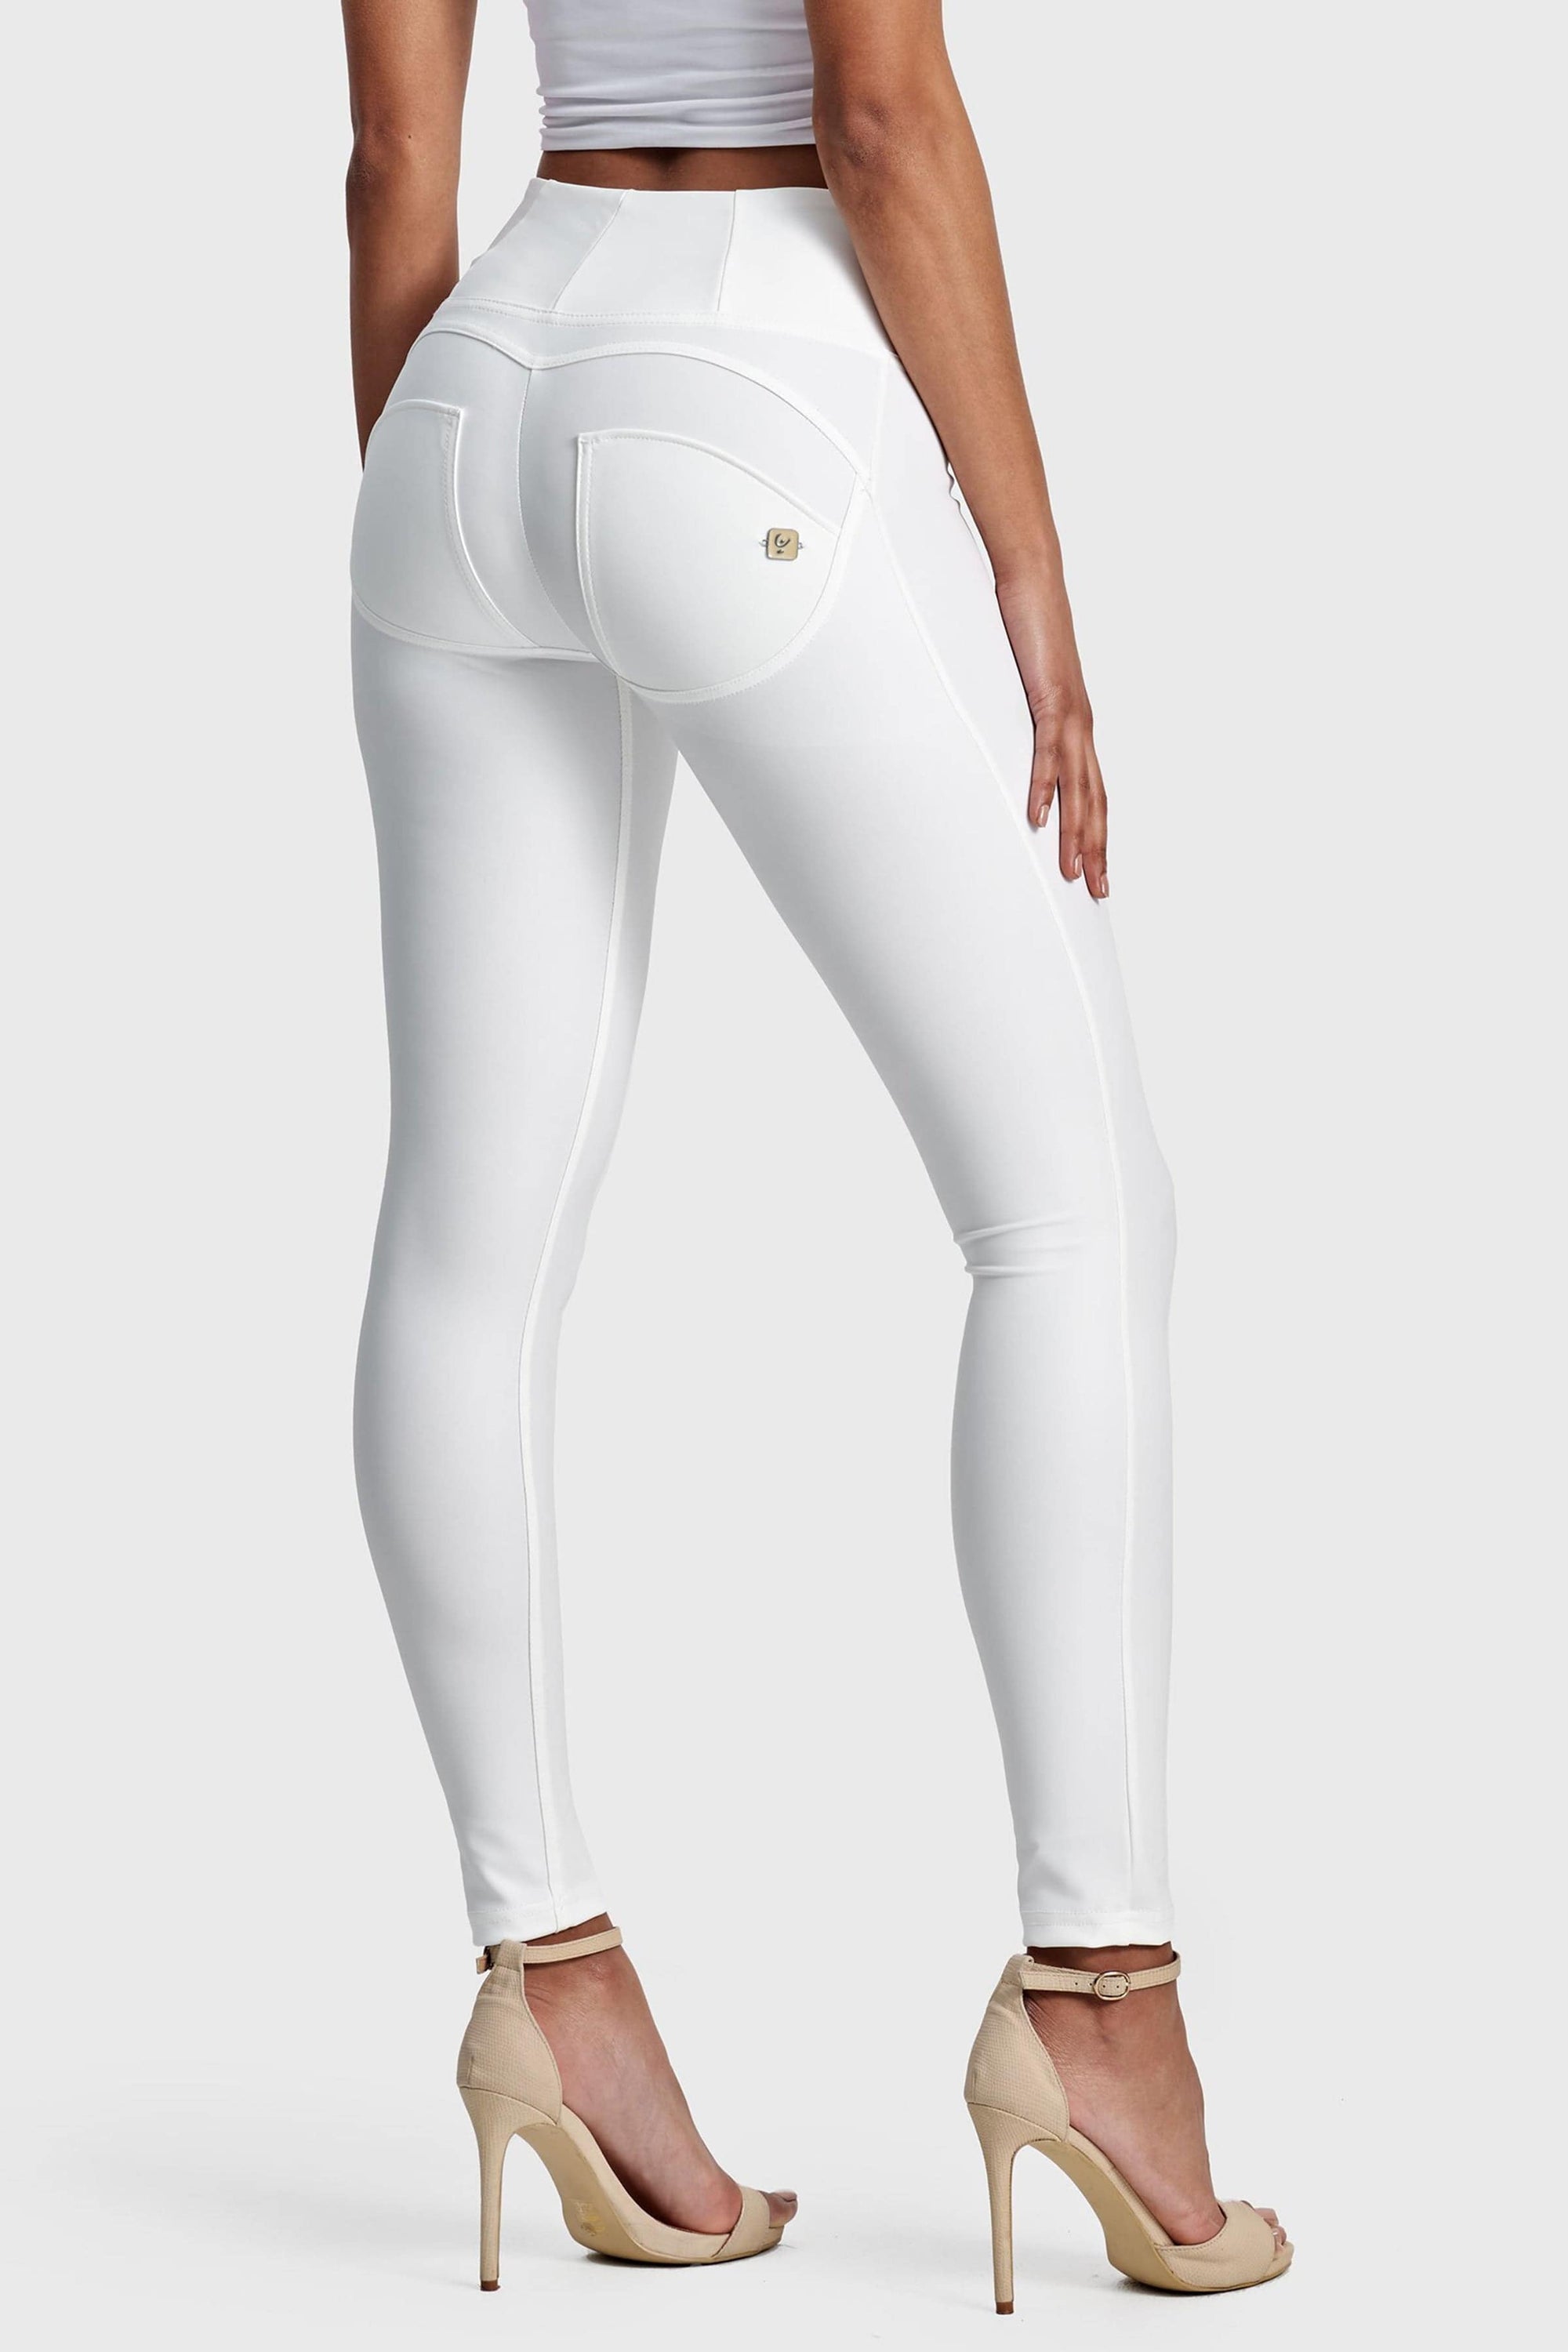 WR.UP® Faux Leather - High Waisted - Full Length - White 1